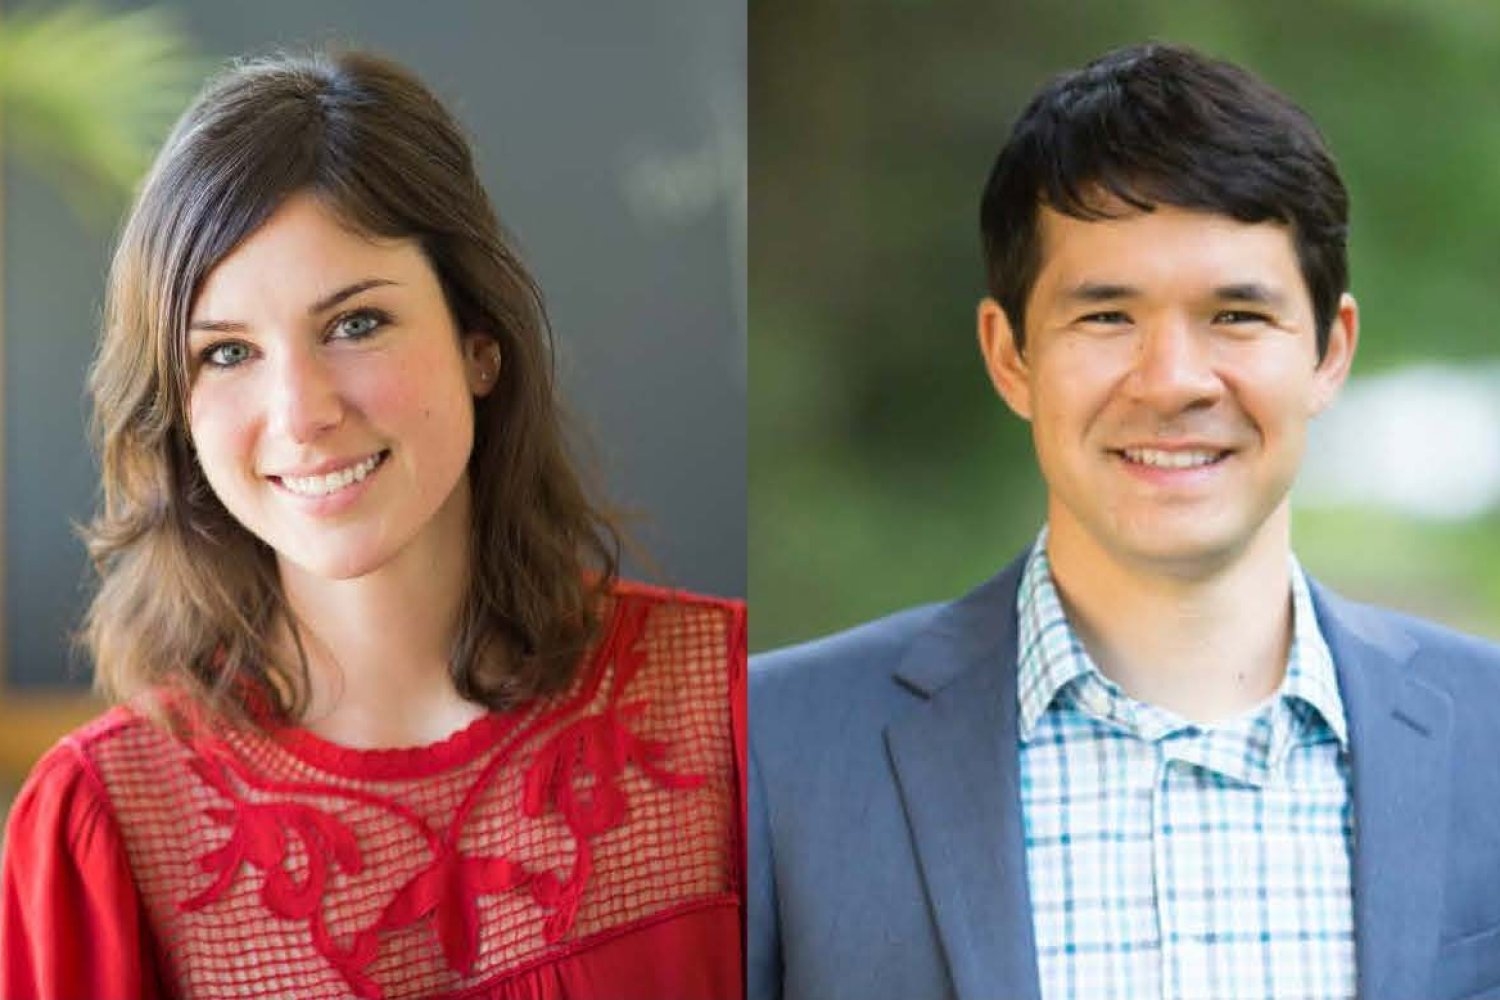 Assistant professors of physics Erin Kara and Kiyoshi Masui were selected for American Astronomical Society 2022 awards. Alumni Camille Carlisle SM ’10, Charles Keith Gendreau PhD ’95, Laura Lopez ’04, Richard Mushotzky ’68, and Donald York ’66 were also honored.